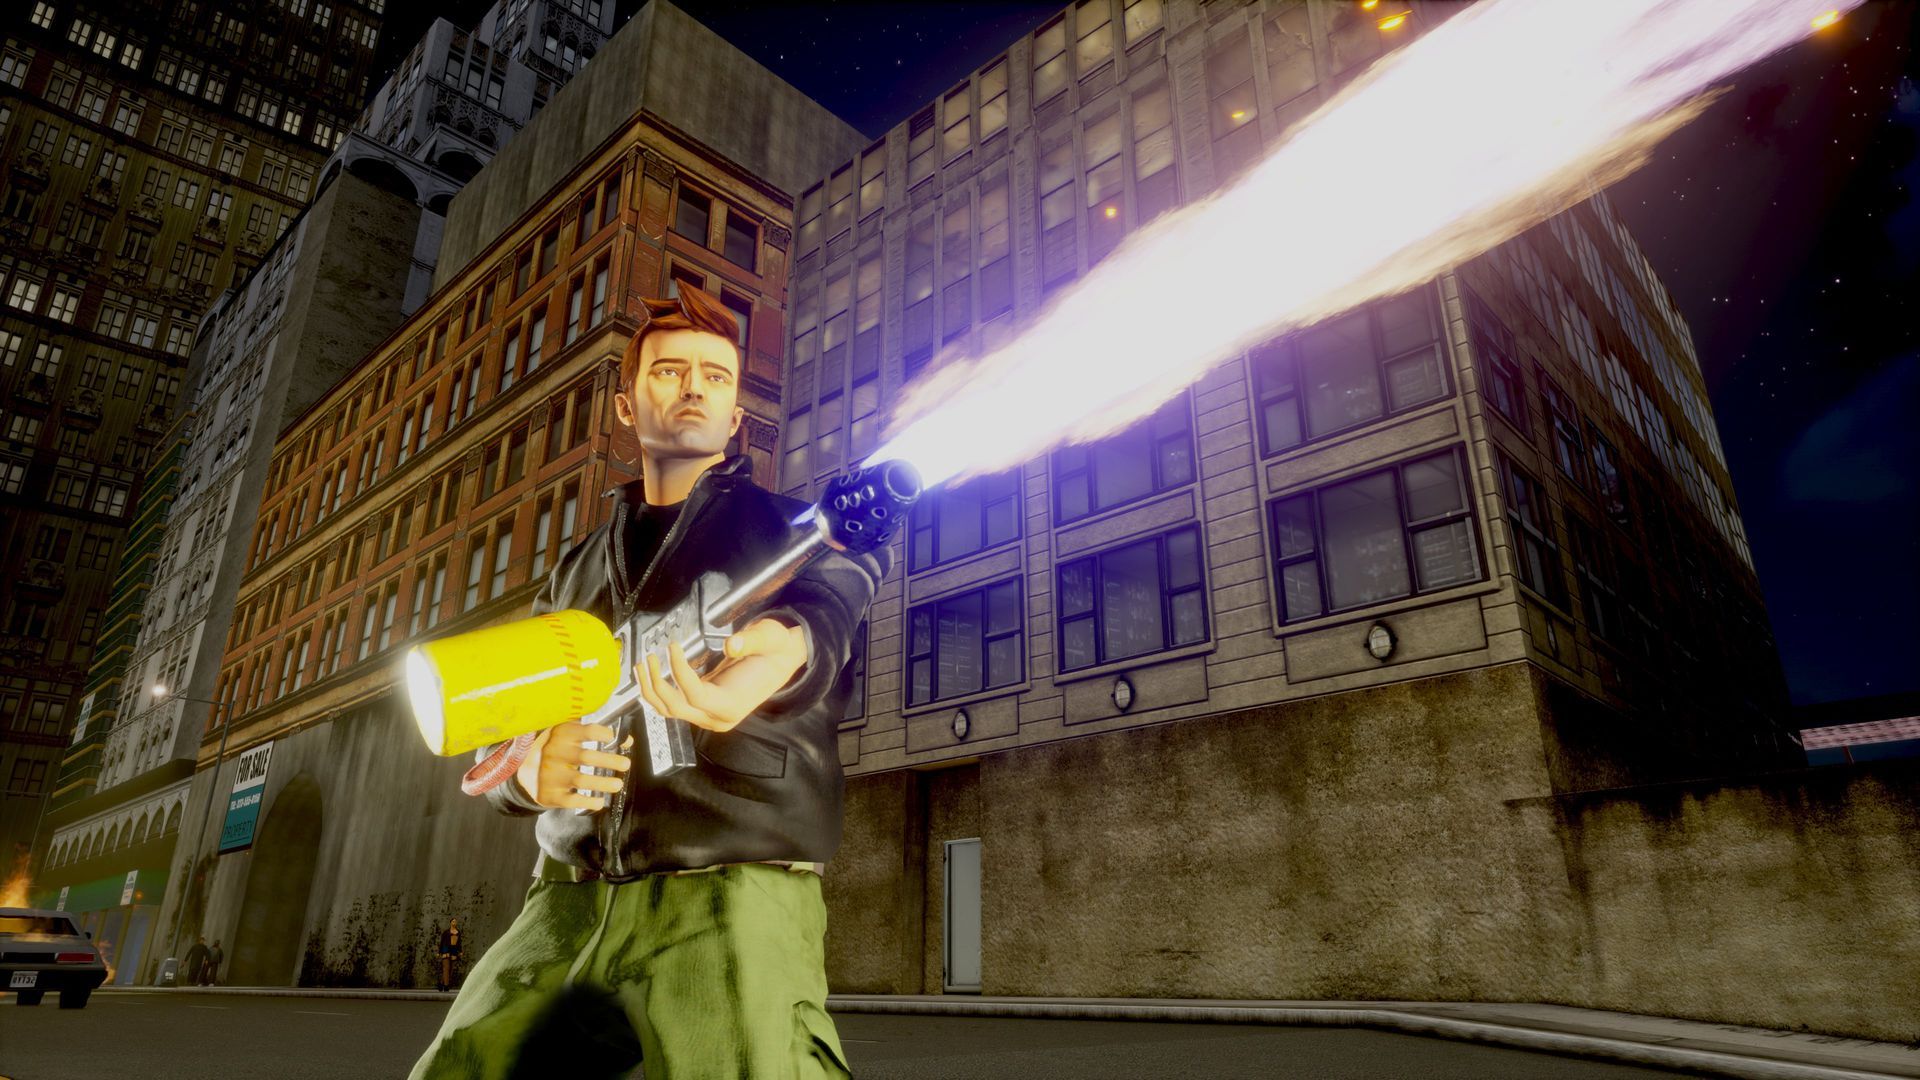 Screencap from an animated video game that shows a person holding a firetorch